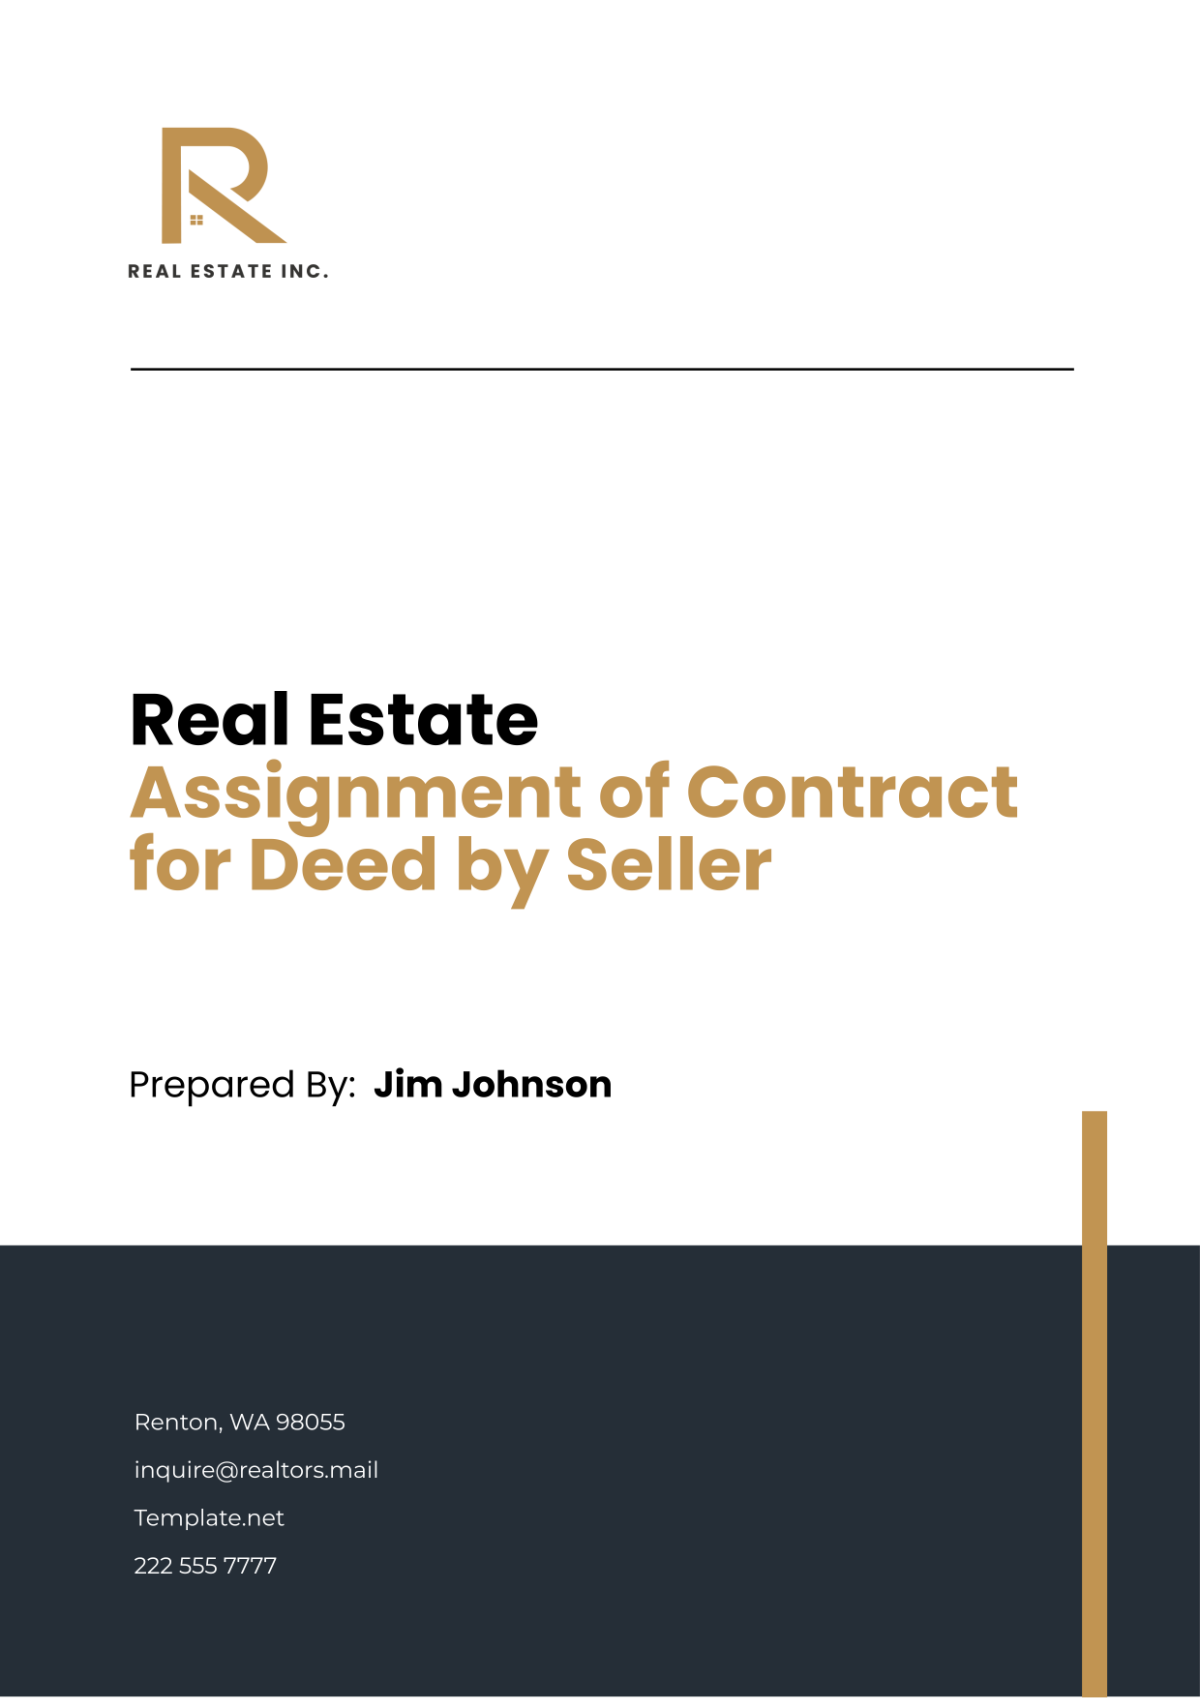 Real Estate Assignment of Contract for Deed by Seller Template